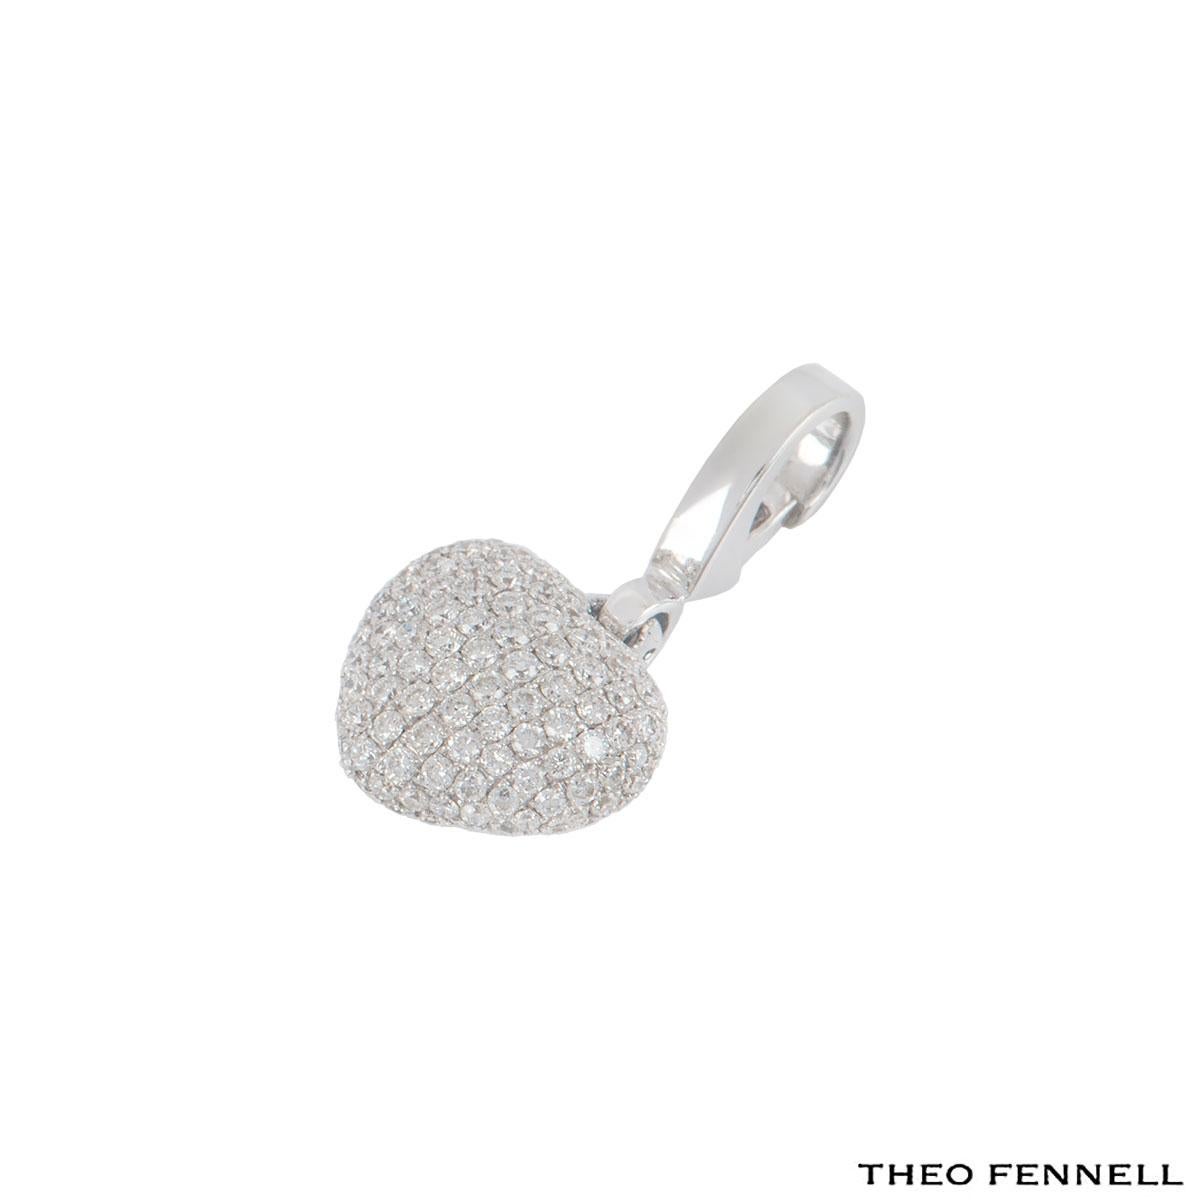 An 18k white gold Theo Fennell heart charm. The charm features round brilliant cut diamonds set in a pave setting through out with a carat weight of approximately 1.13cts. The charm features a lobster clasp and has a height of 2.3cm with a gross